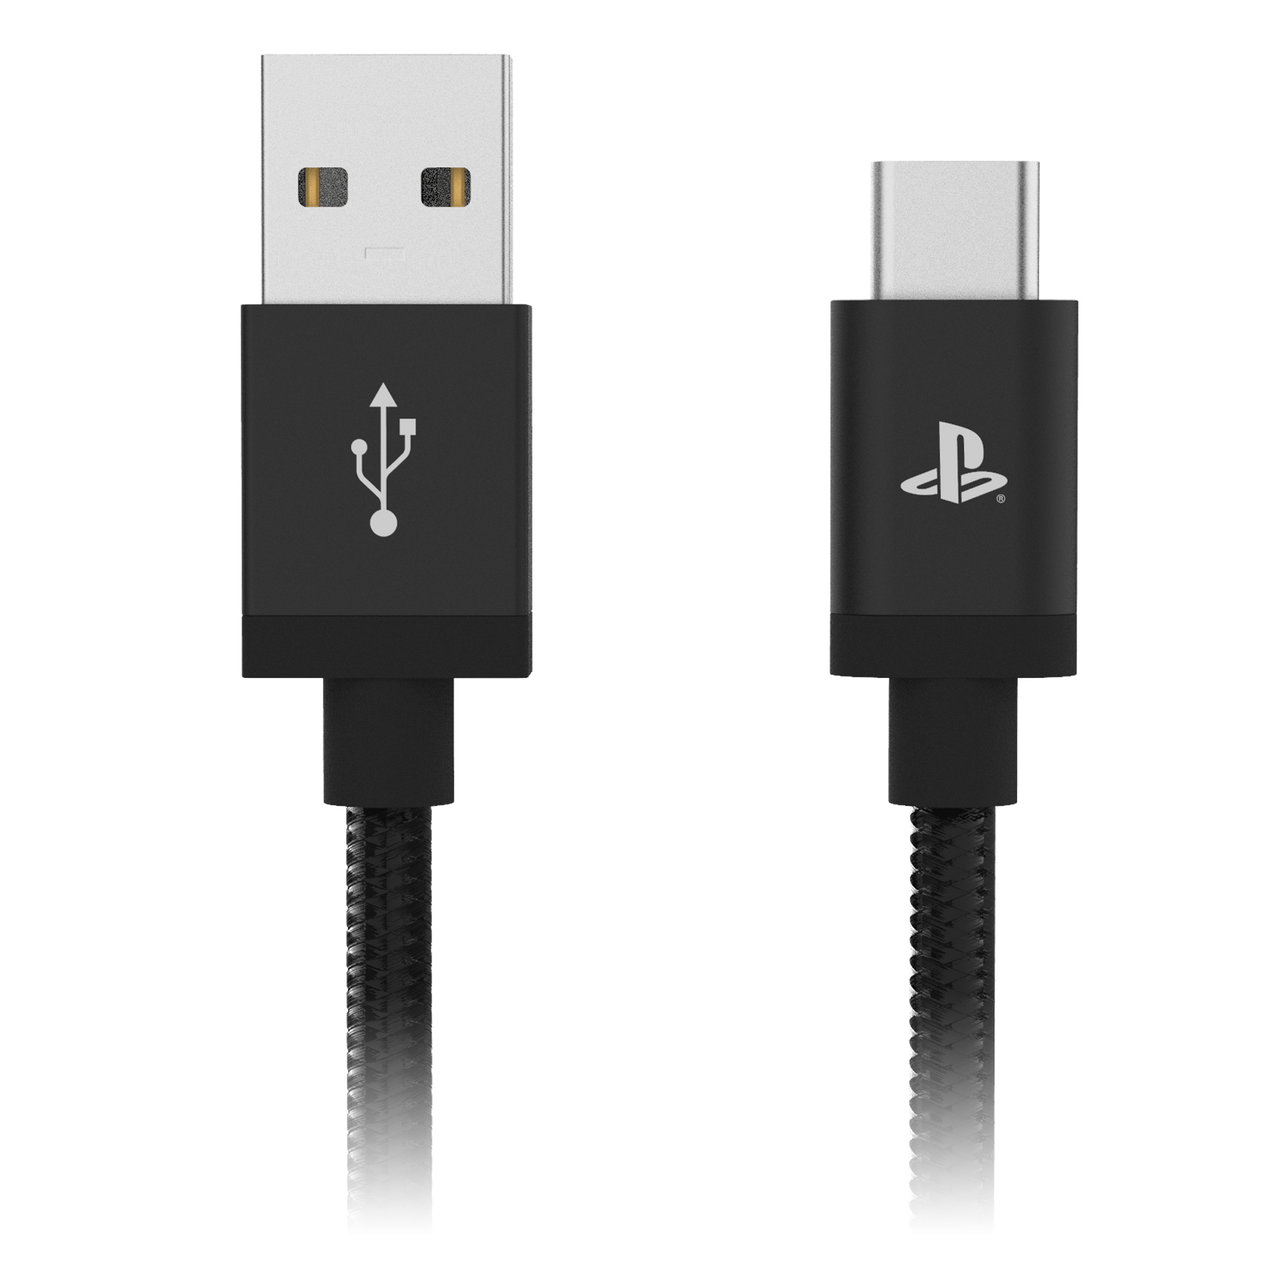 PlayStation 4 DualShock 4 Controller Charging Cable, 10 foot, Black